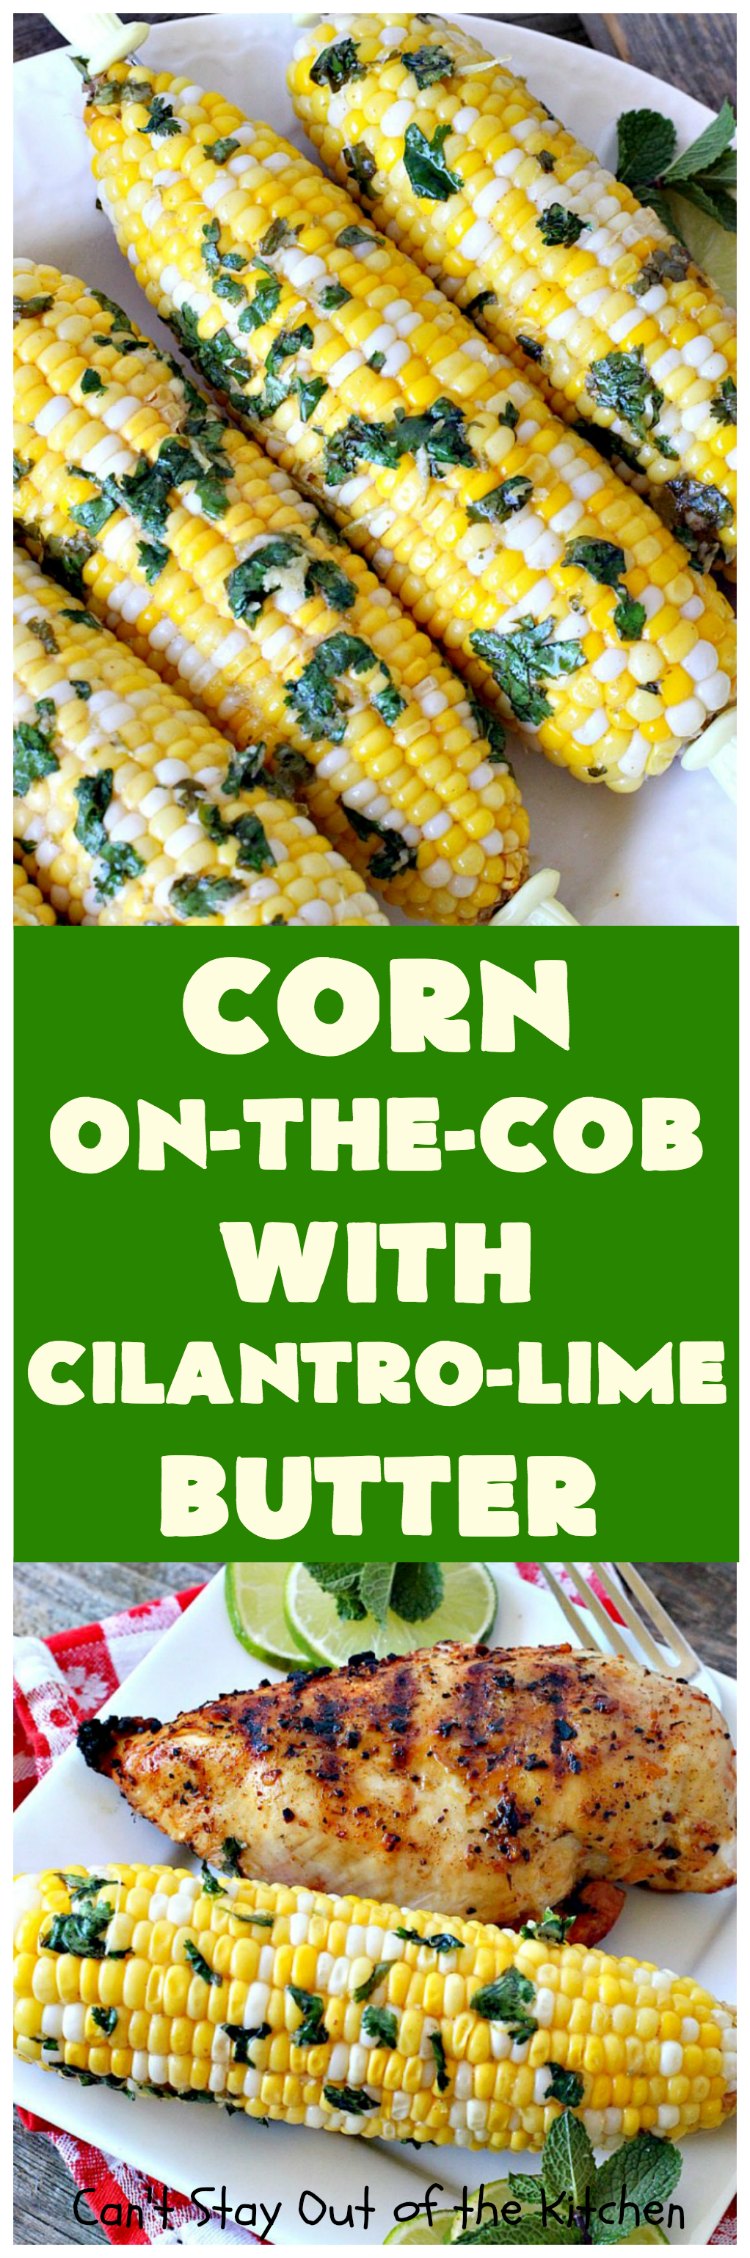 Corn-on-the-Cob with Cilantro-Lime Butter | Can't Stay Out of the Kitchen | this terrific #corn recipe is spread with a delicious #cilantro lime butter & then baked in the oven. It's an easy & tasty way to serve corn-on-the cob for #July4th #LaborDay or other summer barbecues. #glutenfree